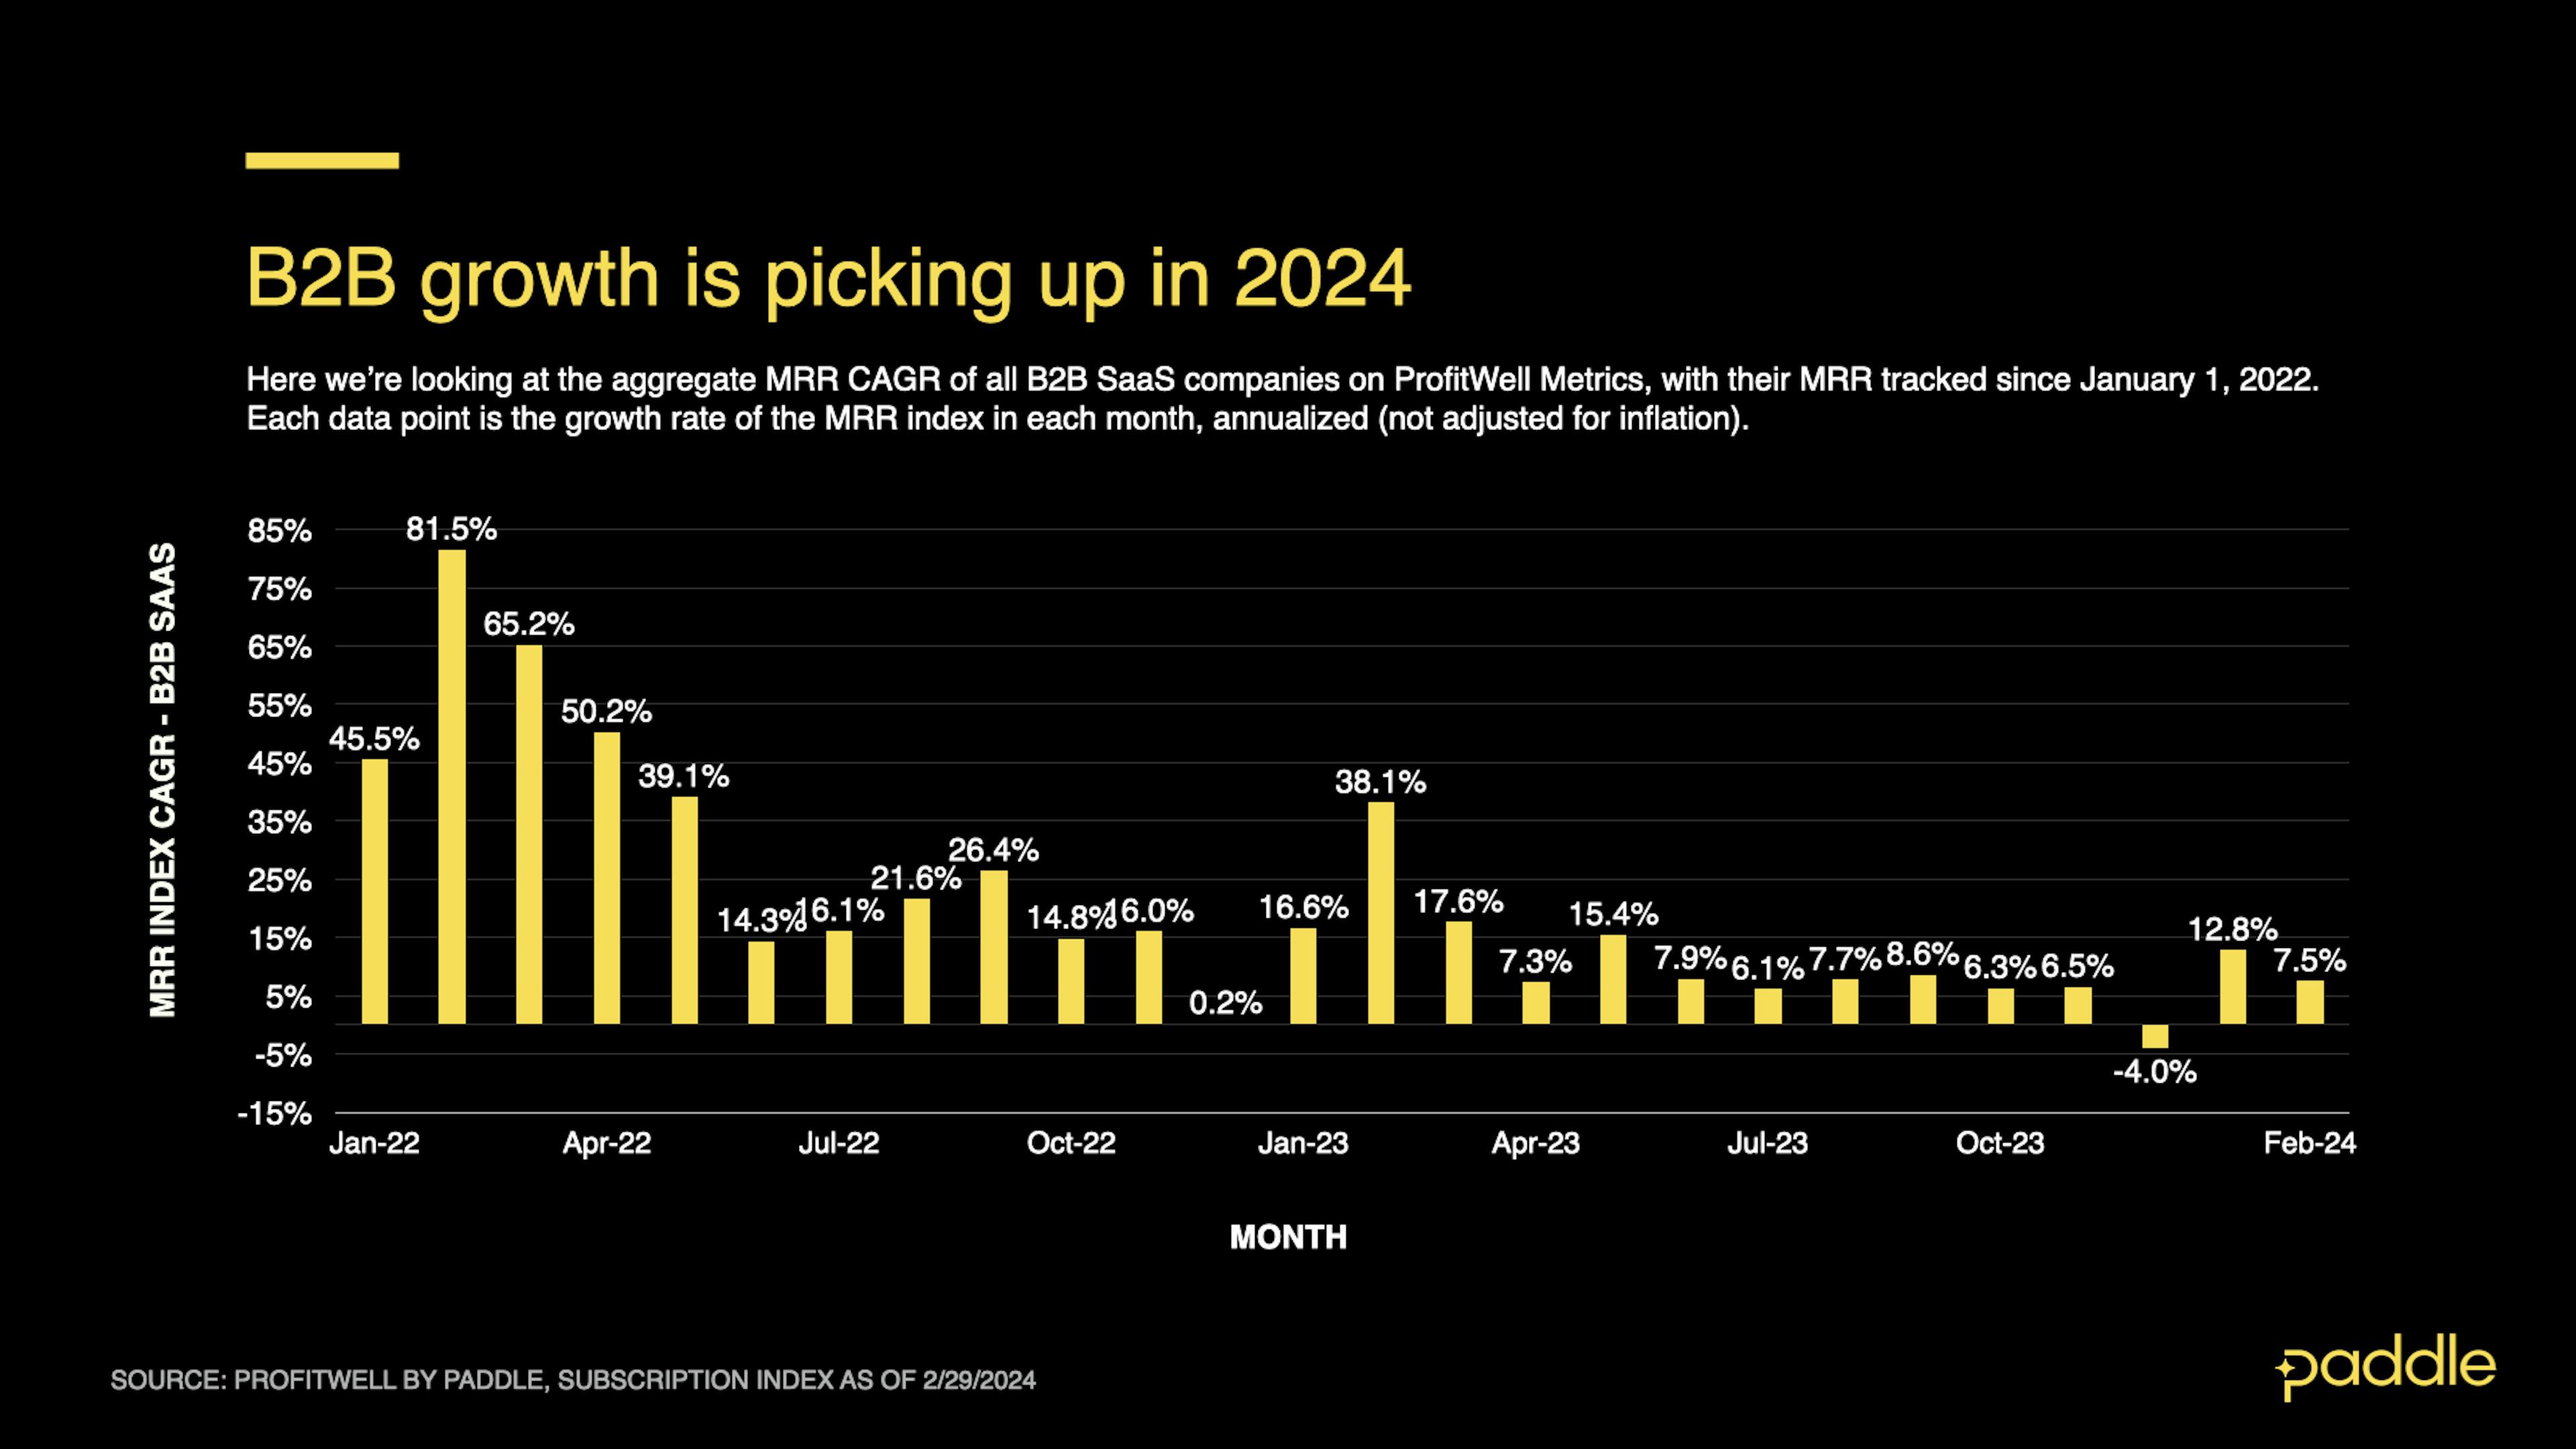 B2B growth is picking up in 2024